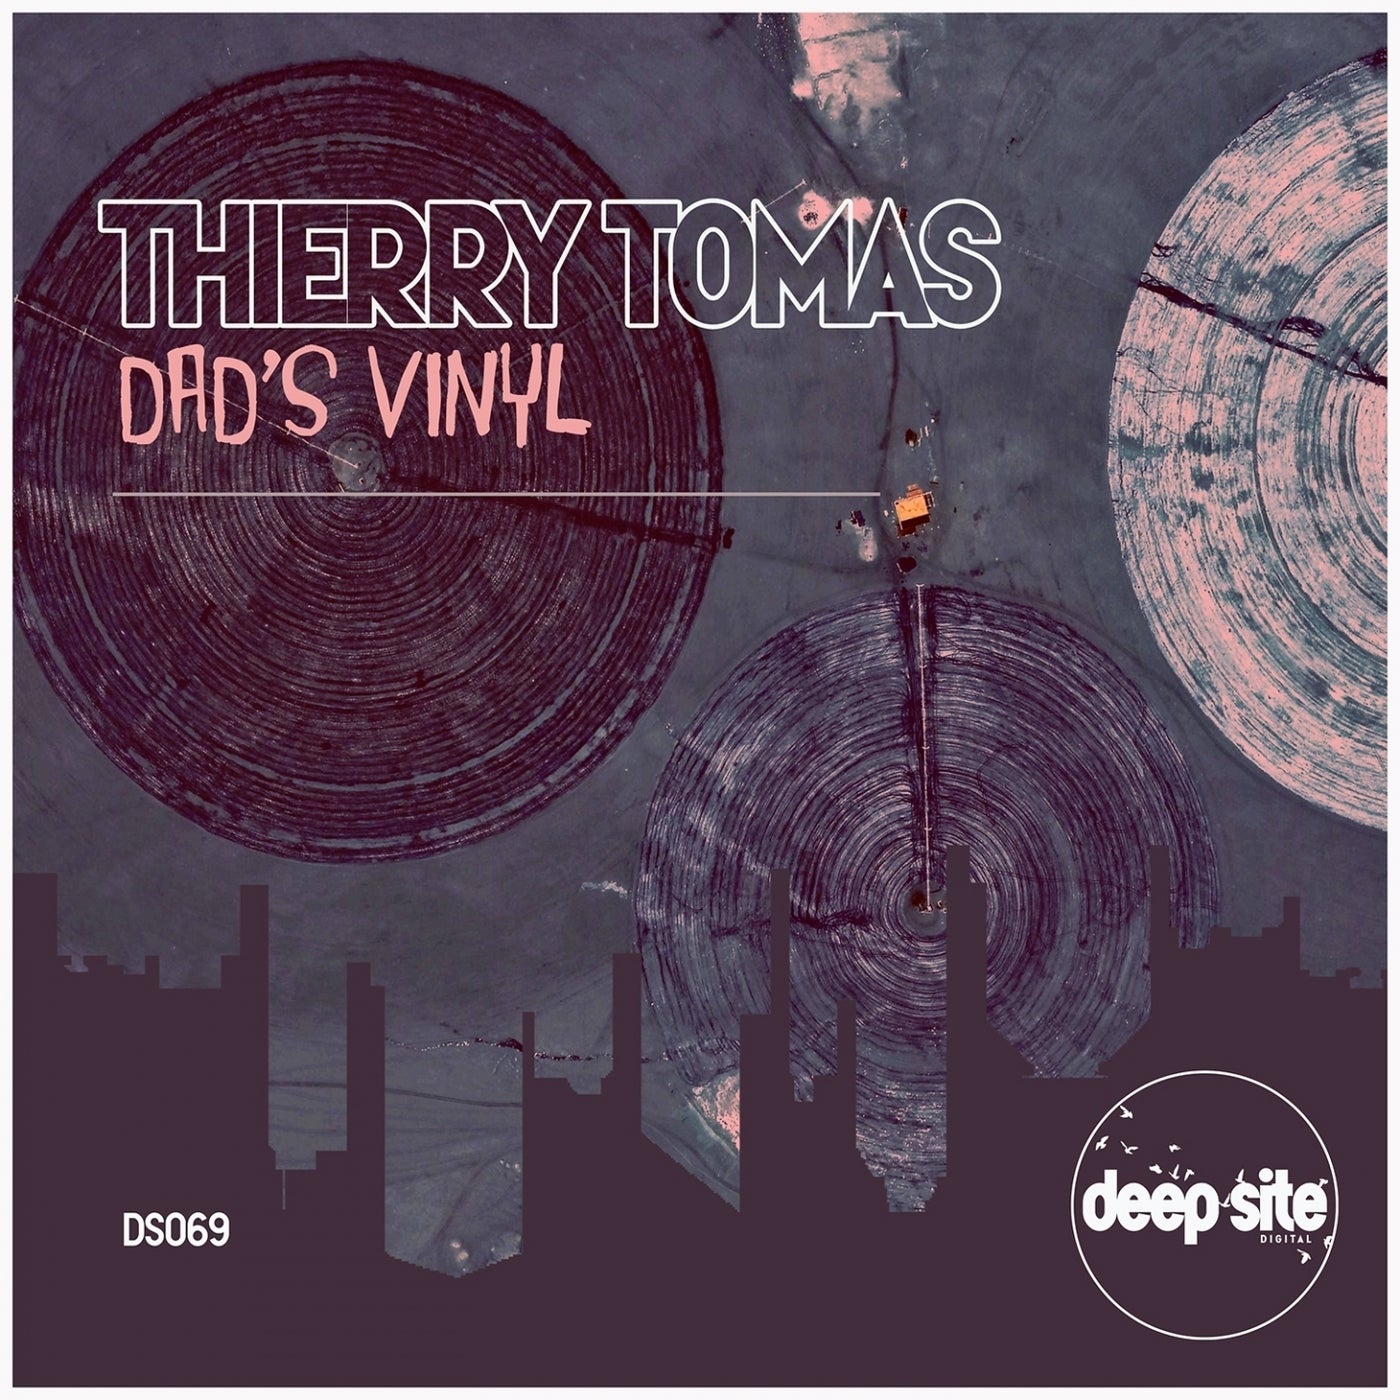 Thierry Tomas - Dad's Vinyl [DS069]